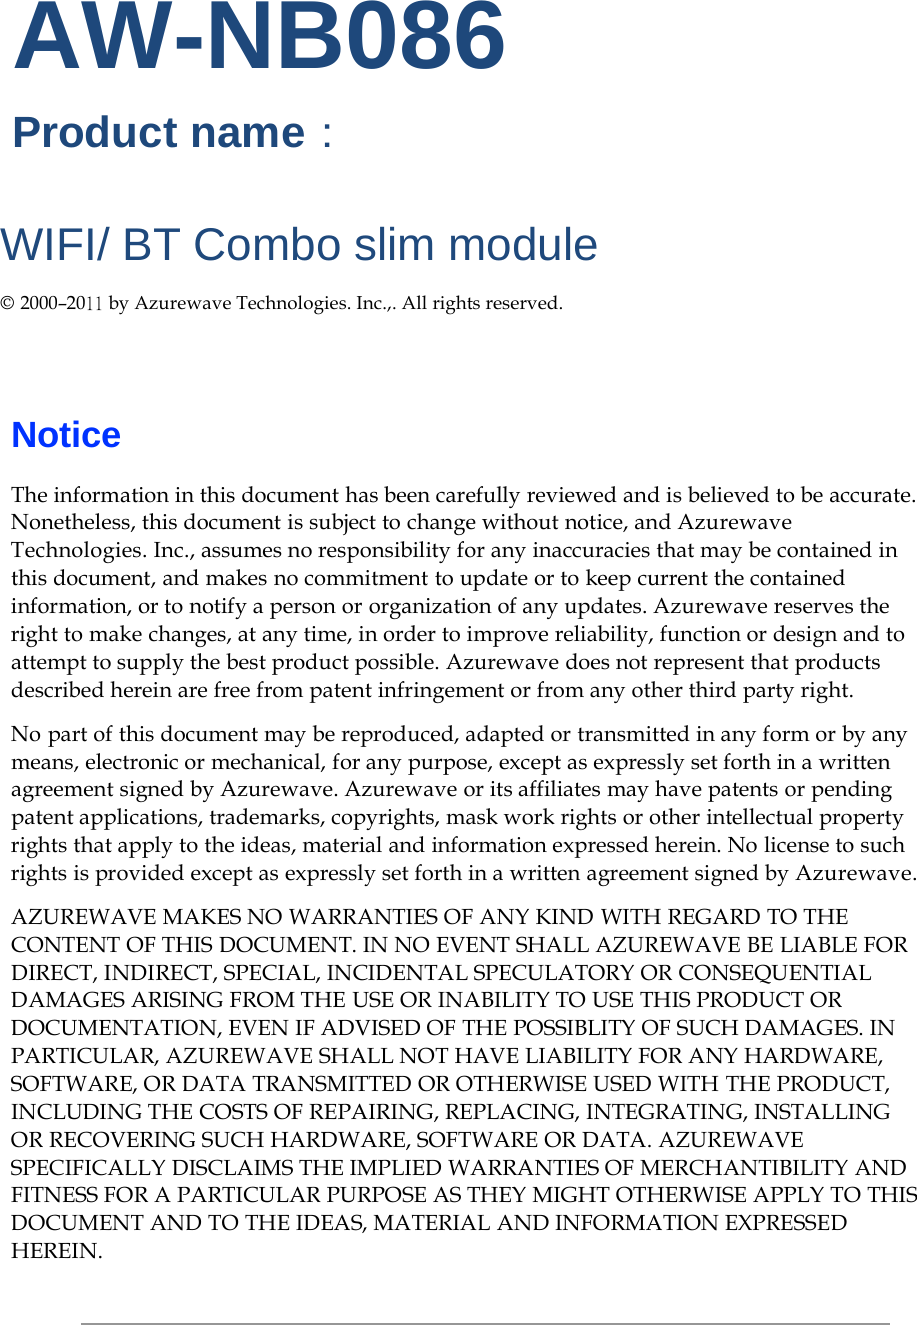     AW-NB086 Product name：  WIFI/ BT Combo slim module  © 2000–2011 by Azurewave Technologies. Inc.,. All rights reserved.      Notice  The information in this document has been carefully reviewed and is believed to be accurate. Nonetheless, this document is subject to change without notice, and Azurewave Technologies. Inc., assumes no responsibility for any inaccuracies that may be contained in this document, and makes no commitment to update or to keep current the contained information, or to notify a person or organization of any updates. Azurewave reserves the right to make changes, at any time, in order to improve reliability, function or design and to attempt to supply the best product possible. Azurewave does not represent that products described herein are free from patent infringement or from any other third party right.  No part of this document may be reproduced, adapted or transmitted in any form or by any means, electronic or mechanical, for any purpose, except as expressly set forth in a written agreement signed by Azurewave. Azurewave or its affiliates may have patents or pending patent applications, trademarks, copyrights, mask work rights or other intellectual property rights that apply to the ideas, material and information expressed herein. No license to such rights is provided except as expressly set forth in a written agreement signed by Azurewave.  AZUREWAVE MAKES NO WARRANTIES OF ANY KIND WITH REGARD TO THE CONTENT OF THIS DOCUMENT. IN NO EVENT SHALL AZUREWAVE BE LIABLE FOR DIRECT, INDIRECT, SPECIAL, INCIDENTAL SPECULATORY OR CONSEQUENTIAL DAMAGES ARISING FROM THE USE OR INABILITY TO USE THIS PRODUCT OR DOCUMENTATION, EVEN IF ADVISED OF THE POSSIBLITY OF SUCH DAMAGES. IN PARTICULAR, AZUREWAVE SHALL NOT HAVE LIABILITY FOR ANY HARDWARE, SOFTWARE, OR DATA TRANSMITTED OR OTHERWISE USED WITH THE PRODUCT, INCLUDING THE COSTS OF REPAIRING, REPLACING, INTEGRATING, INSTALLING OR RECOVERING SUCH HARDWARE, SOFTWARE OR DATA. AZUREWAVE SPECIFICALLY DISCLAIMS THE IMPLIED WARRANTIES OF MERCHANTIBILITY AND FITNESS FOR A PARTICULAR PURPOSE AS THEY MIGHT OTHERWISE APPLY TO THIS DOCUMENT AND TO THE IDEAS, MATERIAL AND INFORMATION EXPRESSED HEREIN. 